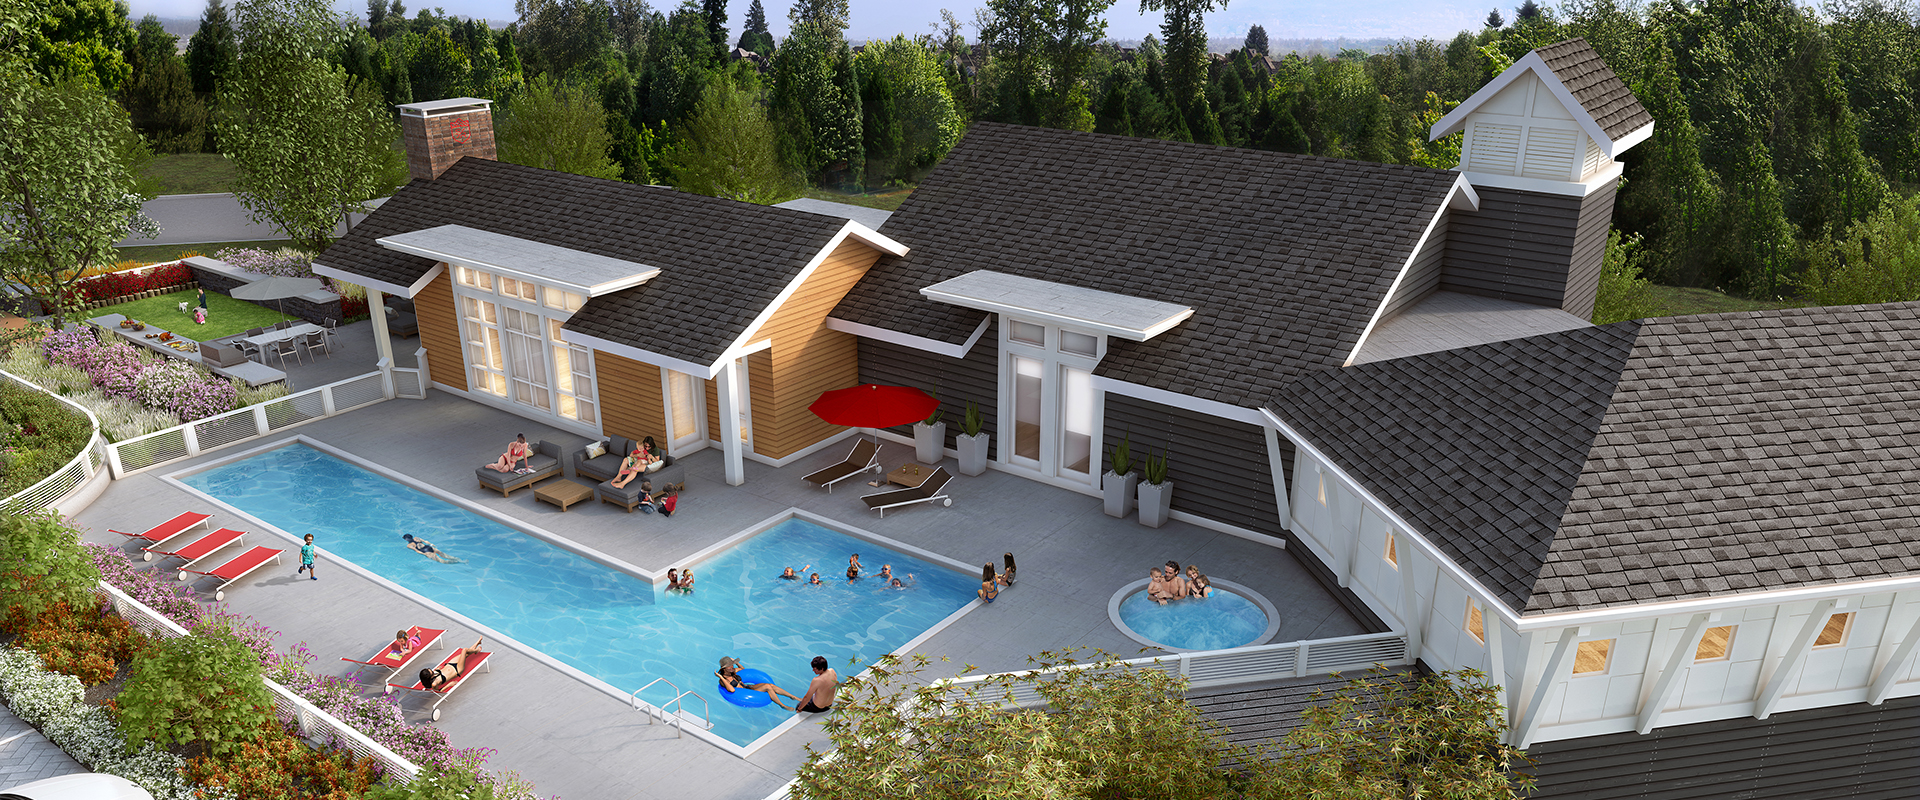 This relaxing clubhouse could be yours to enjoy at South Surrey townhomes South Ridge Club